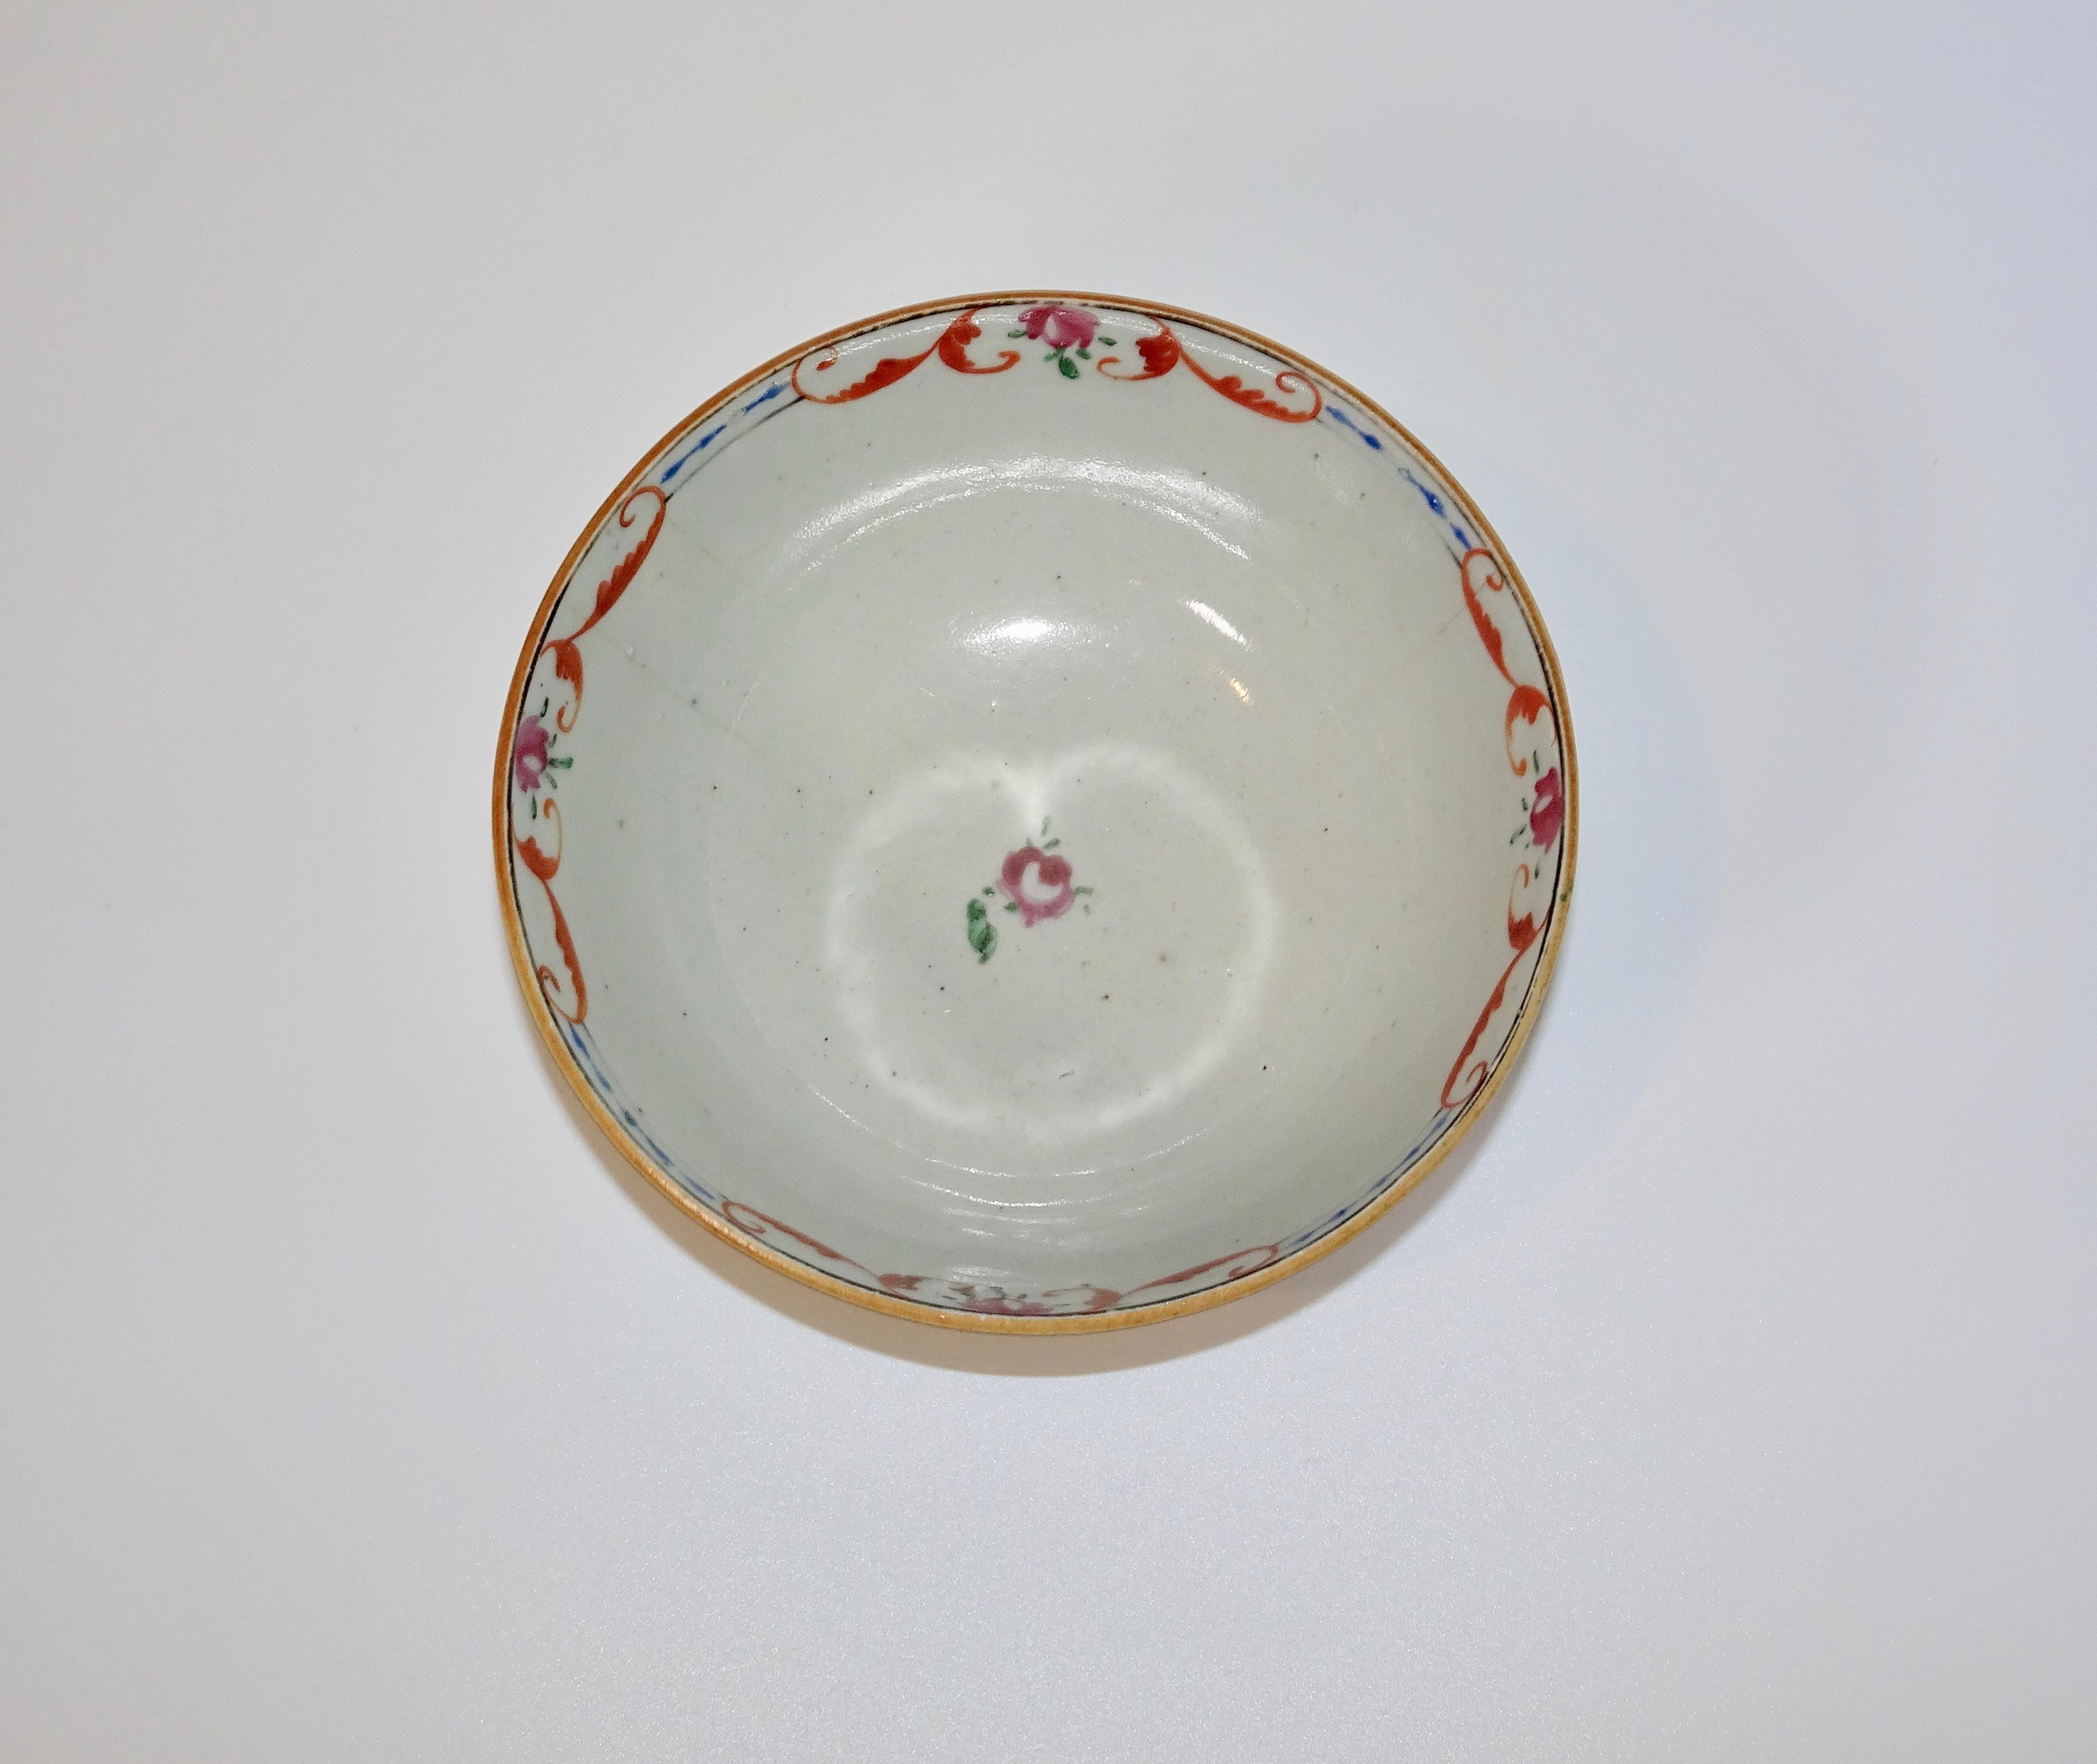 This is a 19th century Chinese export bowl in white. It has a decorative floral design in pinks, reds, and blues around the rim.